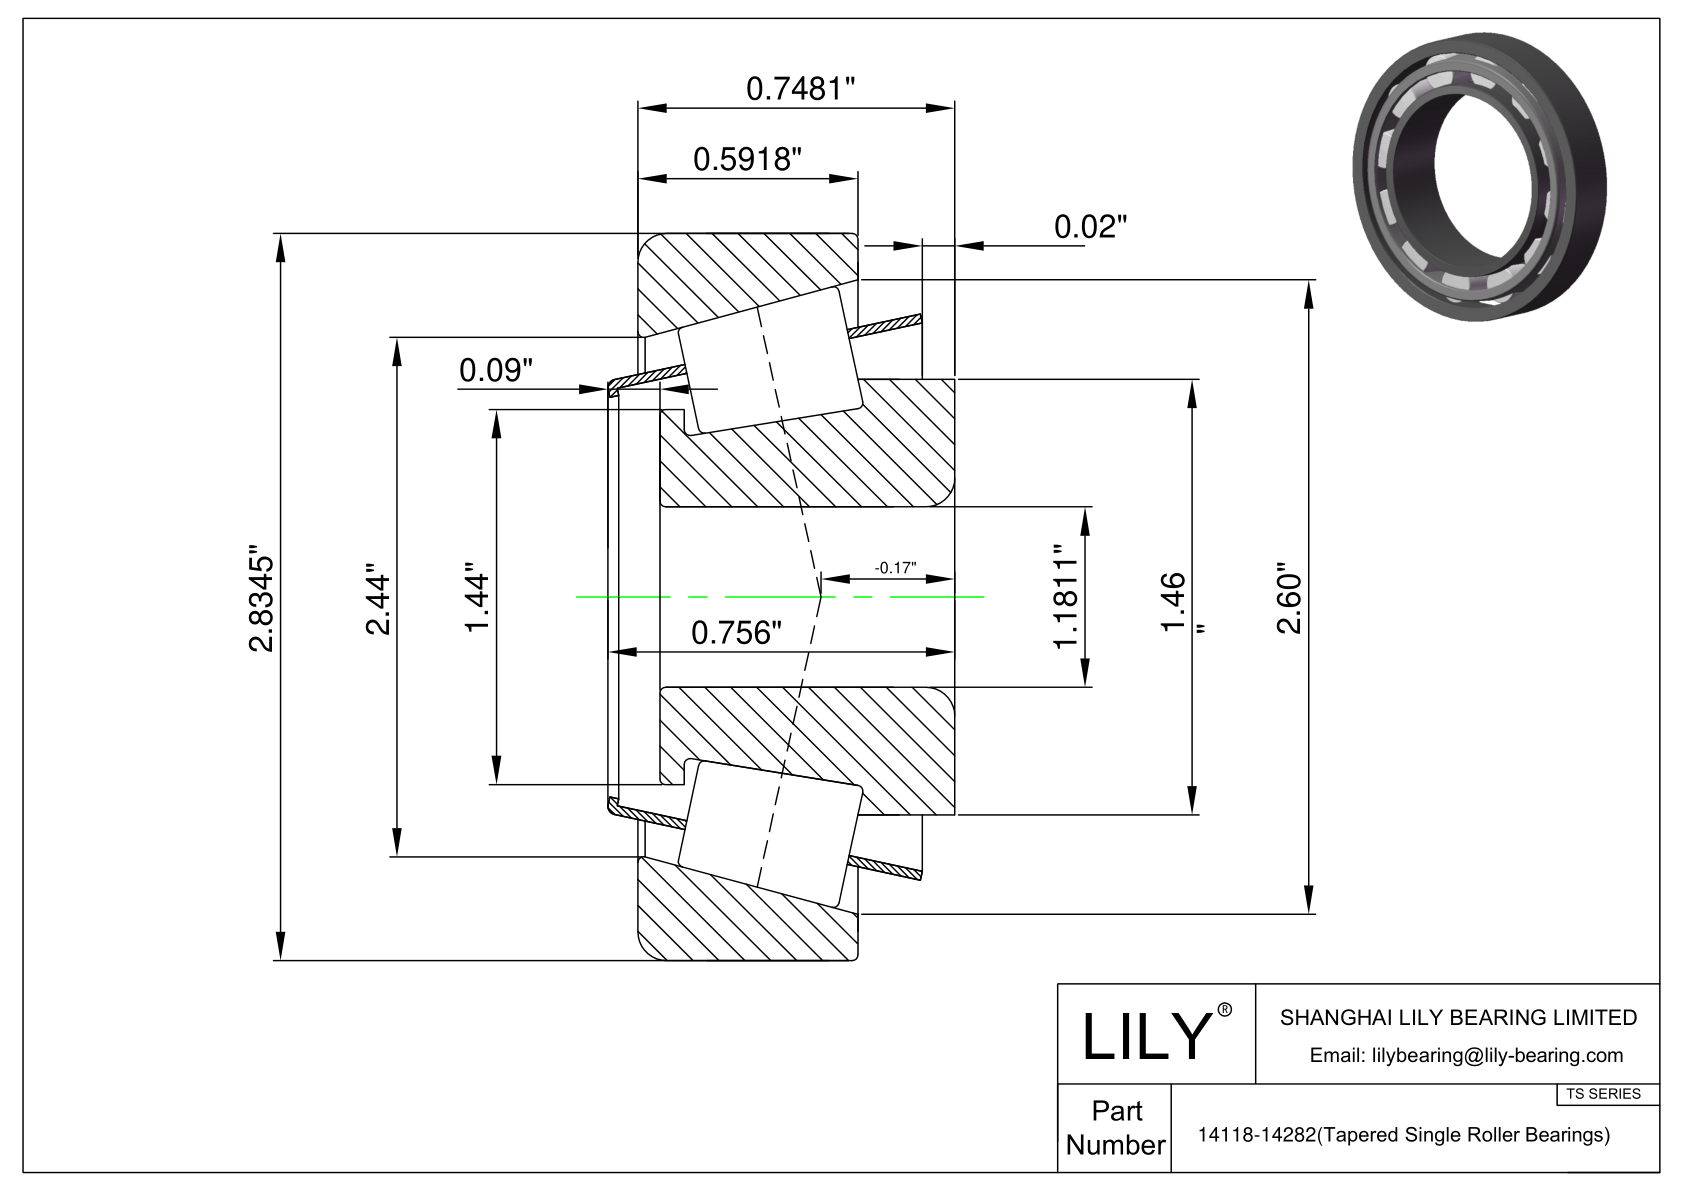 14118-14282 TS (Tapered Single Roller Bearings) (Imperial) cad drawing